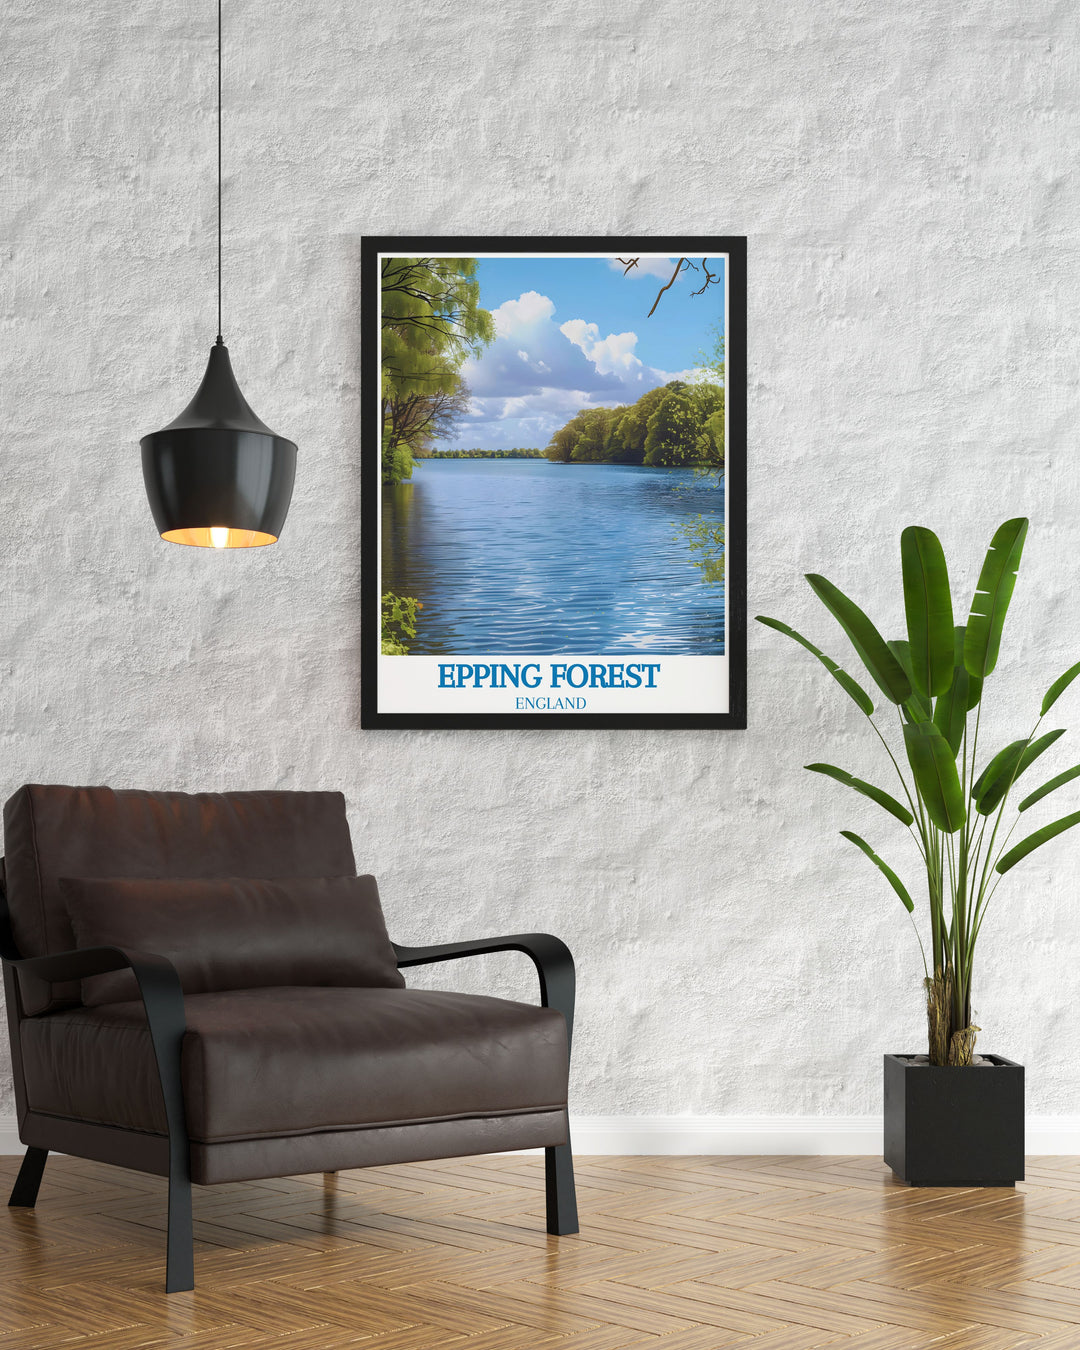 Framed art of Epping Forest, illustrating the rich history and natural beauty of Londons ancient woodland.